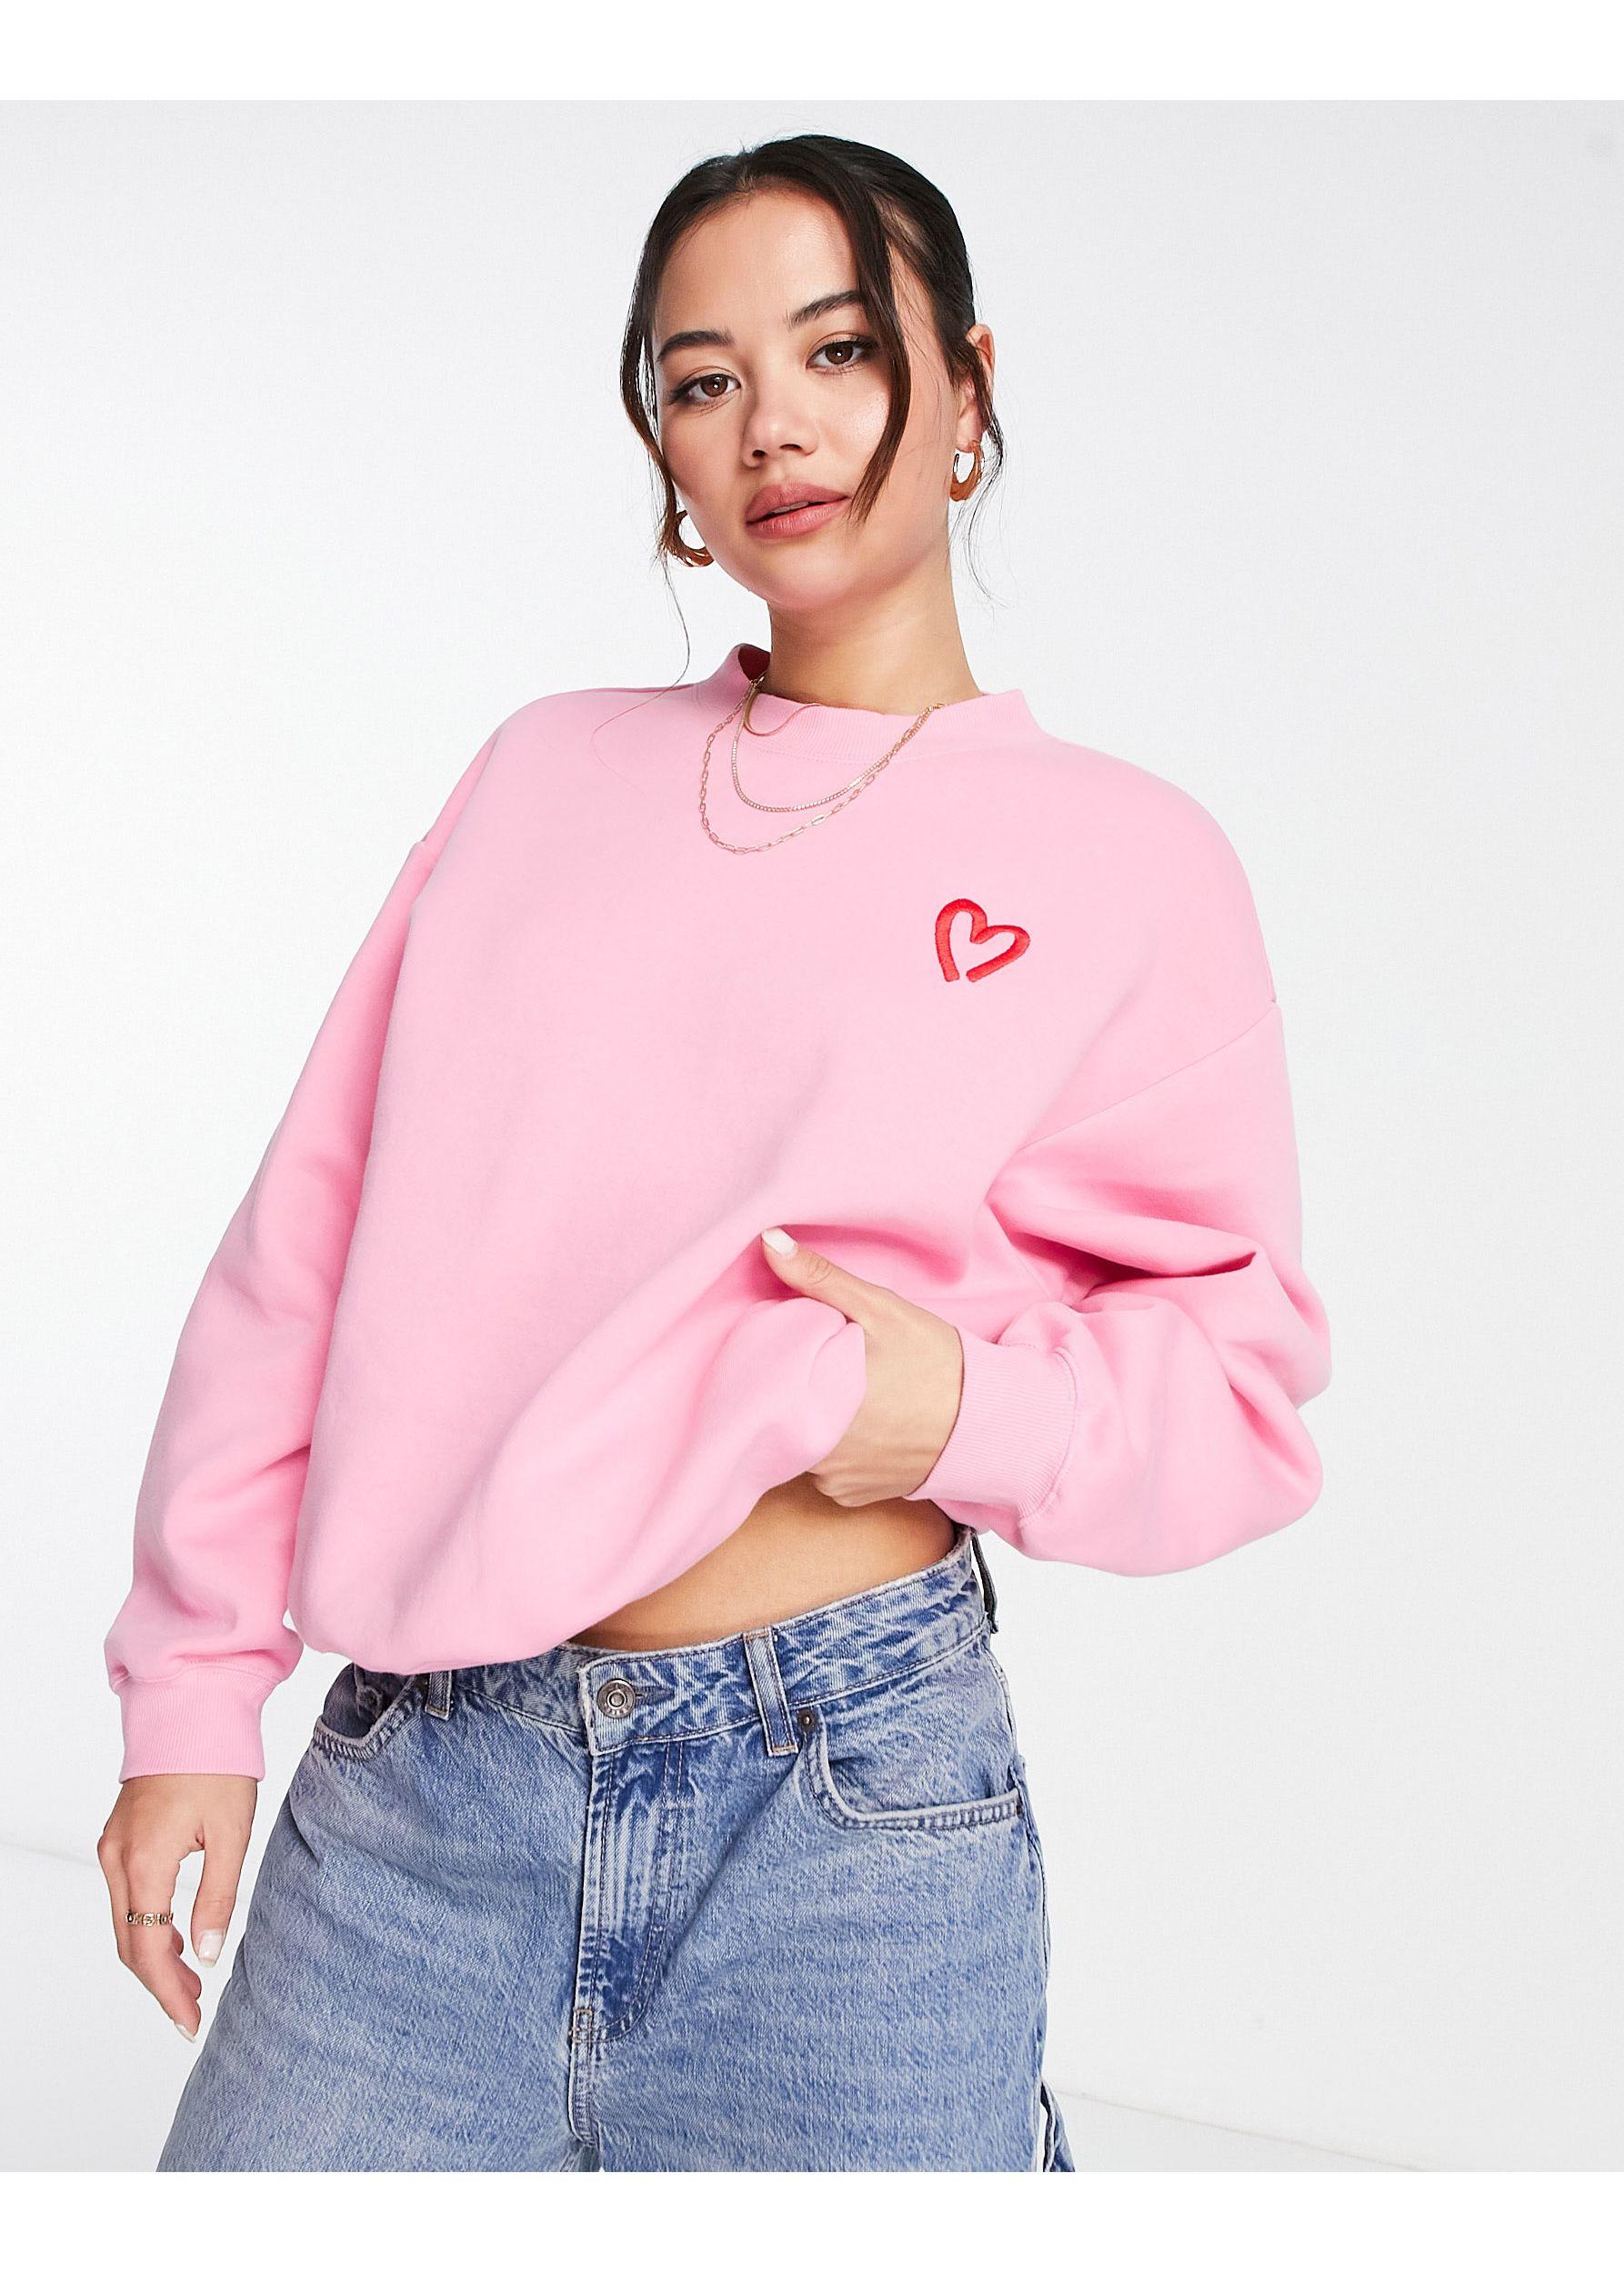 Monki Sweatshirt With Heart Embroidery in Pink | Lyst